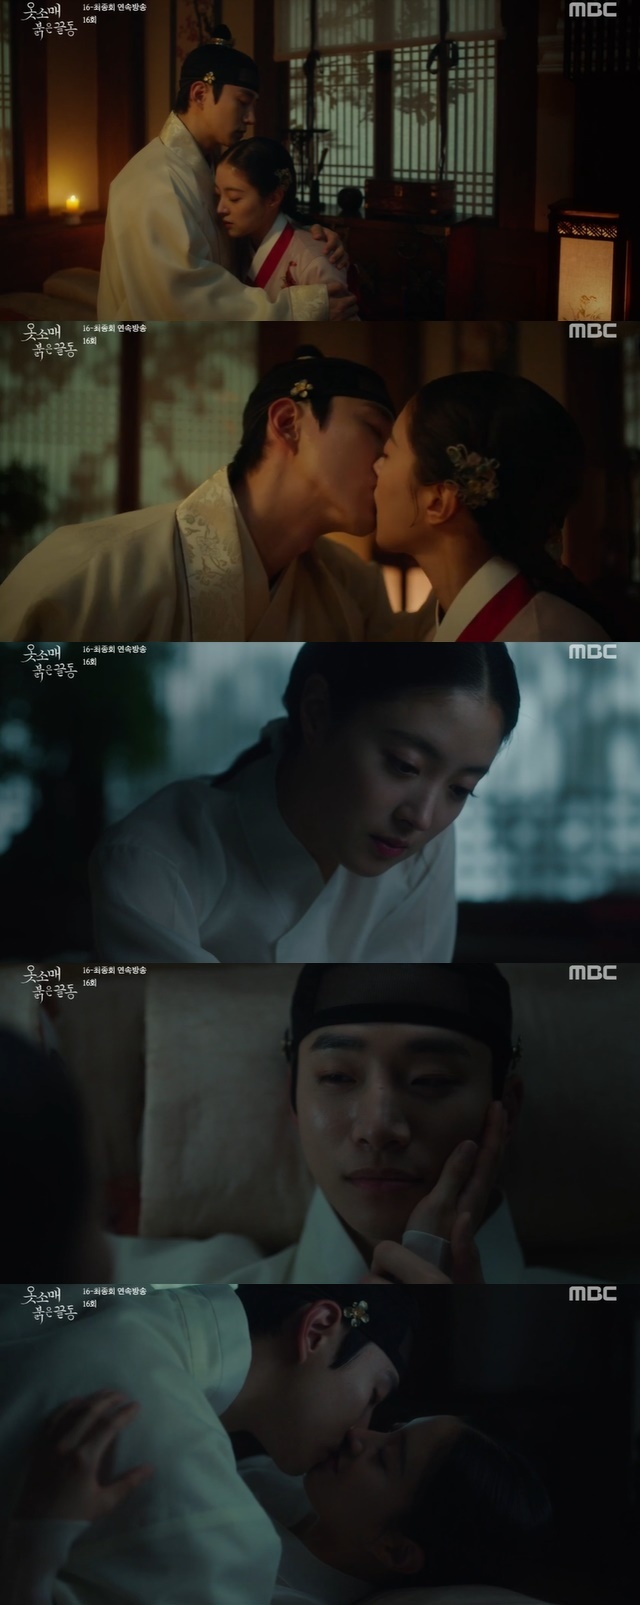 Lee Joon-ho spent his first night with Lee Se-young.In the 16th episode of MBCs Golden Earth Drama The Red Sleeve (playplayed by Jeong Hae-ri / directed by Jeong Ji-in and Song Yeon-hwa), which aired on January 1, Lee Joon-ho, who unfurled Misunderstood about blue paltosis, decided to make a reservation of Sung Deok-im (Lee Se-young).On this day, Hwabin (Lee Seo-bu) was attached to the preparation (Jang Hee-jin) by speculation and put the sin of sympathy on Sung Duk-im.At the end of the day, the preparation for being rejected by Sung Duk-im to be his own person was with Hwabin with the intention to destroy Sungdeok.However, it was later revealed by Hye Bin (Kang Mal-geum) that Sung-sik (Yang Byeong-yeol), the son of Sung Deok-im, was a pro-brother, and Lee, who confirmed the intention of preparation, decided to make Seong Deok-ims Seungeun to keep Sung Deok-im to the end.The Sungdeokim in the settlement was Misunderstood. Sungdeokim told the Esan, Did you get angry at the postmen for what happened today, so you are going to punish me like you said before.He said he would release his clothes and punish him. If he does not receive the dignity of the Seungeun, he will step back to the back room and live as a rice burrow. So, I know that Sung Duk-im cares about his brother and his companion more than himself. Deok, I have been deprived of you many times.I do not do it anymore. I do not lose you again. He then embraced Sungdeok in his arms and said, Even if you do not love me, you are mine.Do not cry alone where I am no longer. Do not be hurt by someone other than me. Sung Deok-im said, You will regret it when the day is bright. You will blame yourself for doing something wrong.I will keep you until you are in the Bowee. I have my word. Let me go. Let me go.